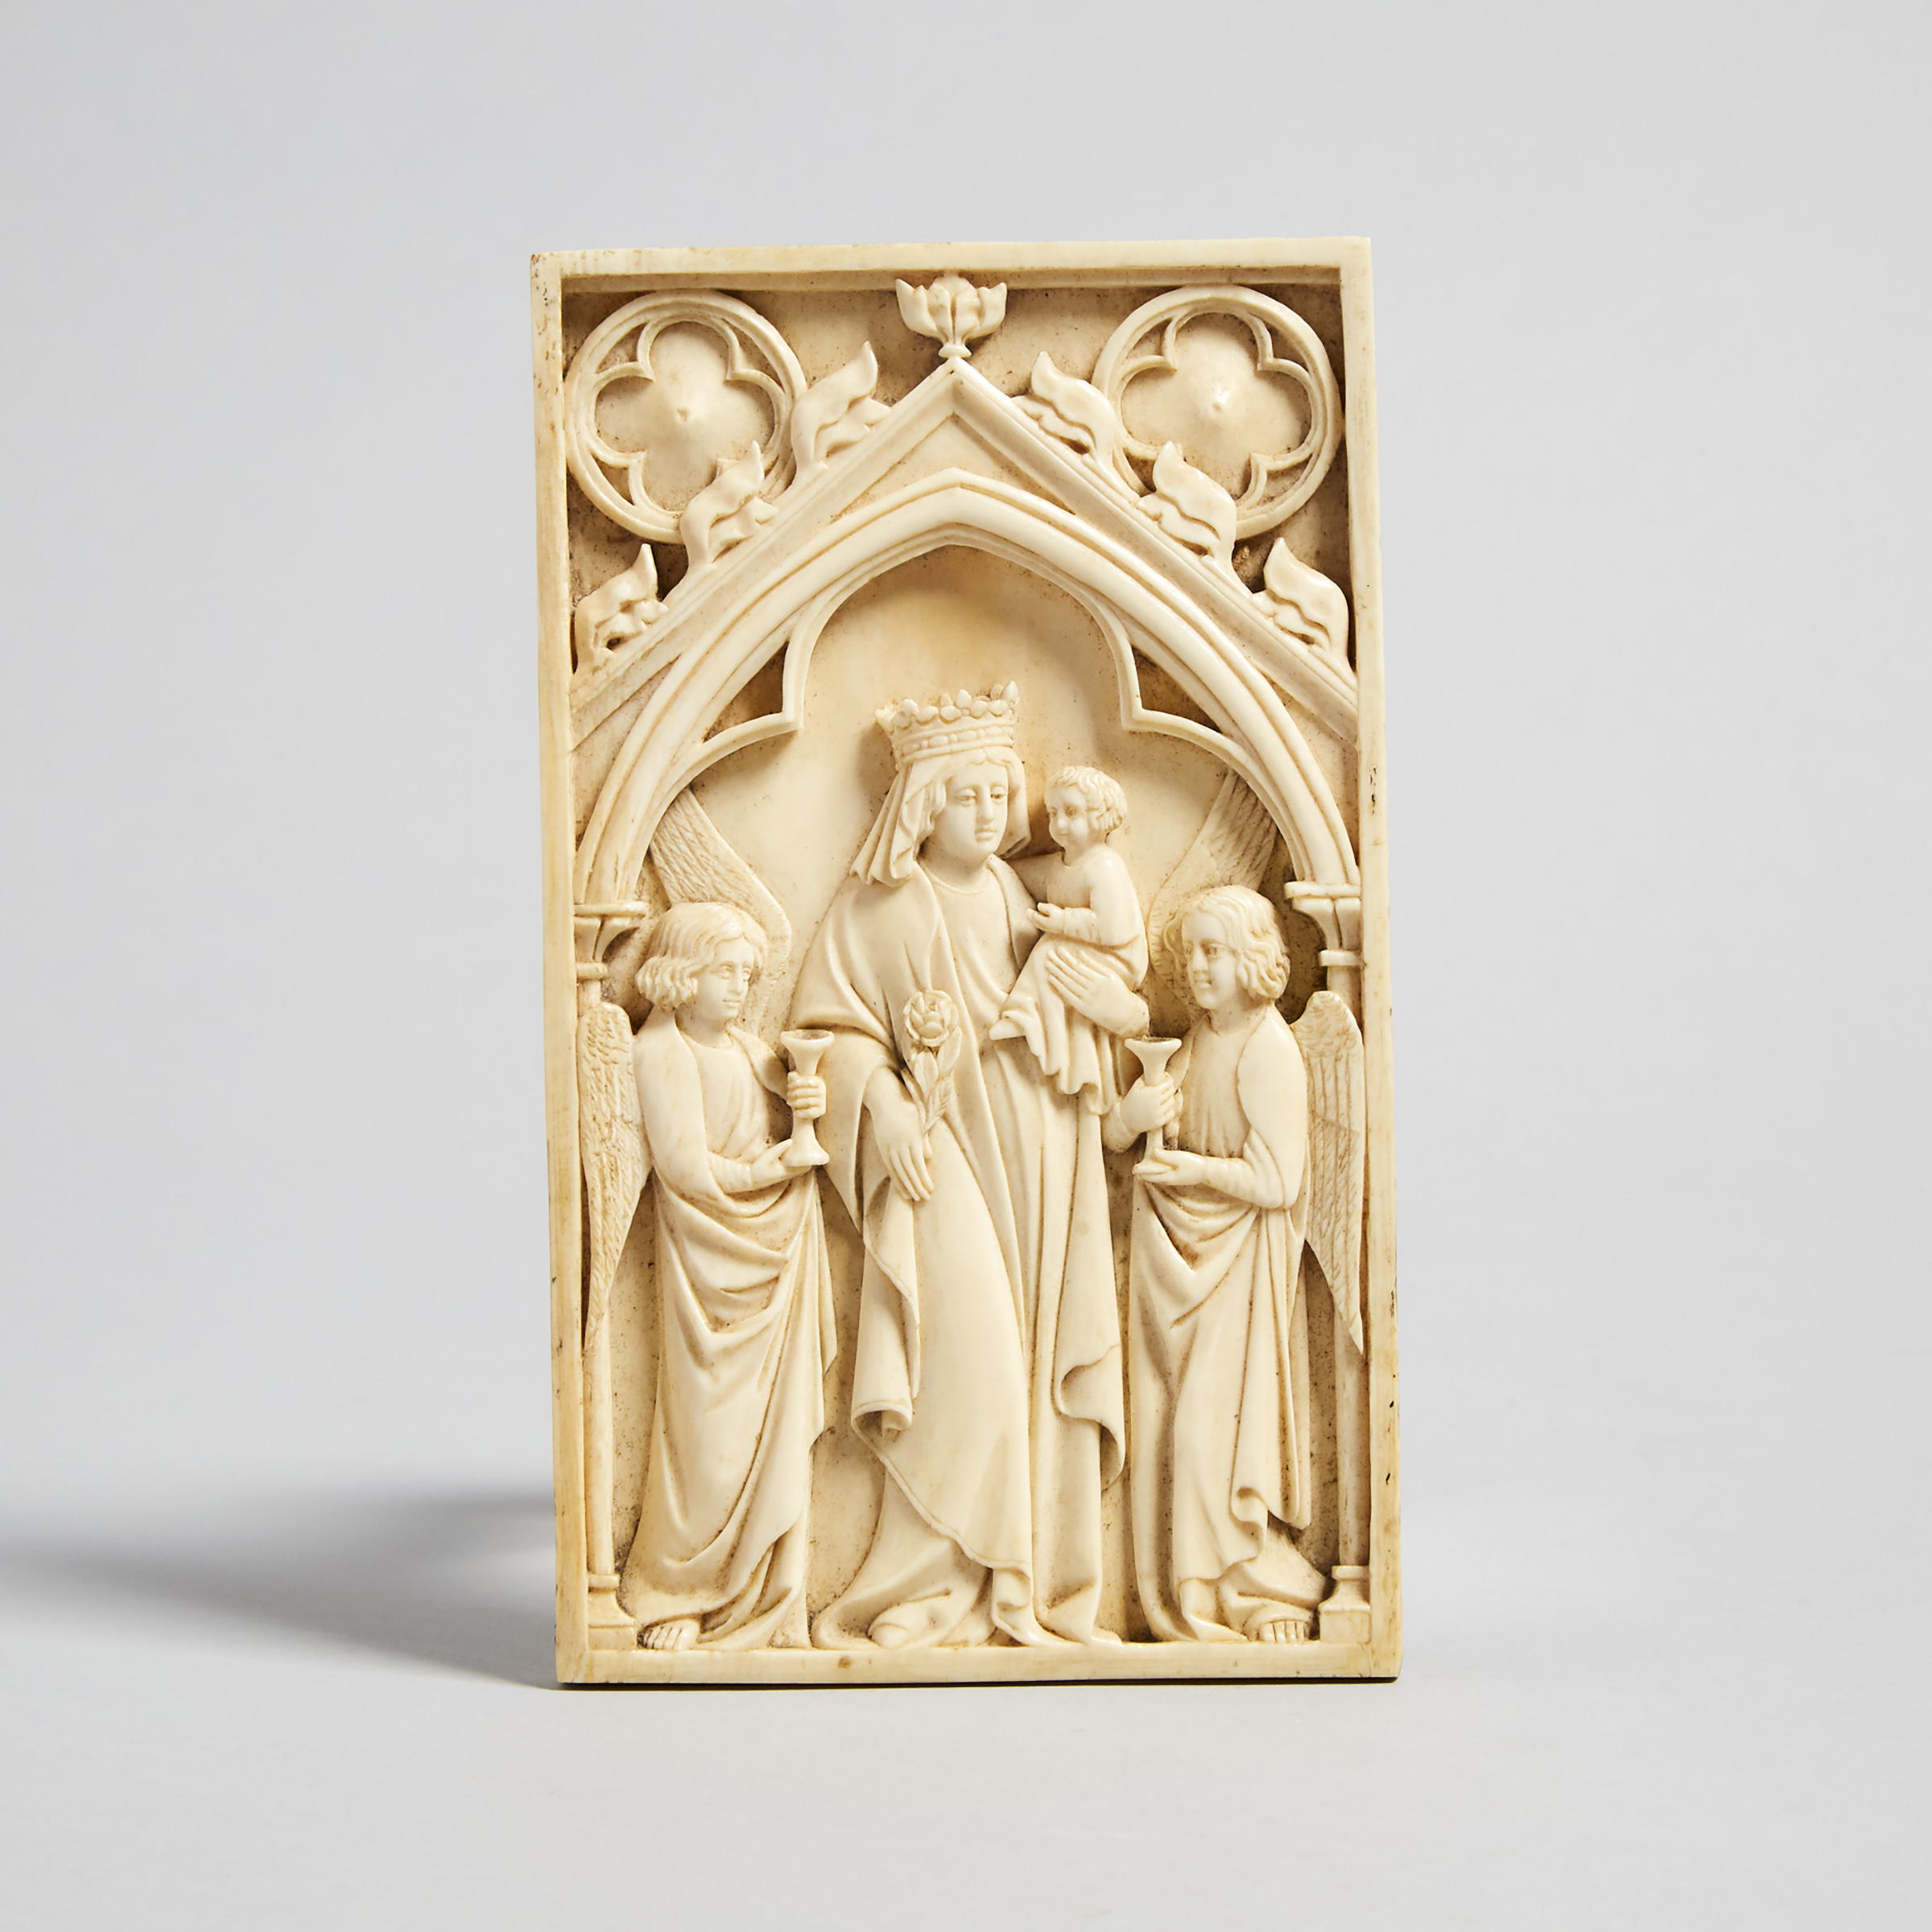 French Gothic Relief Carved Ivory Plaque, 18th century or earlier